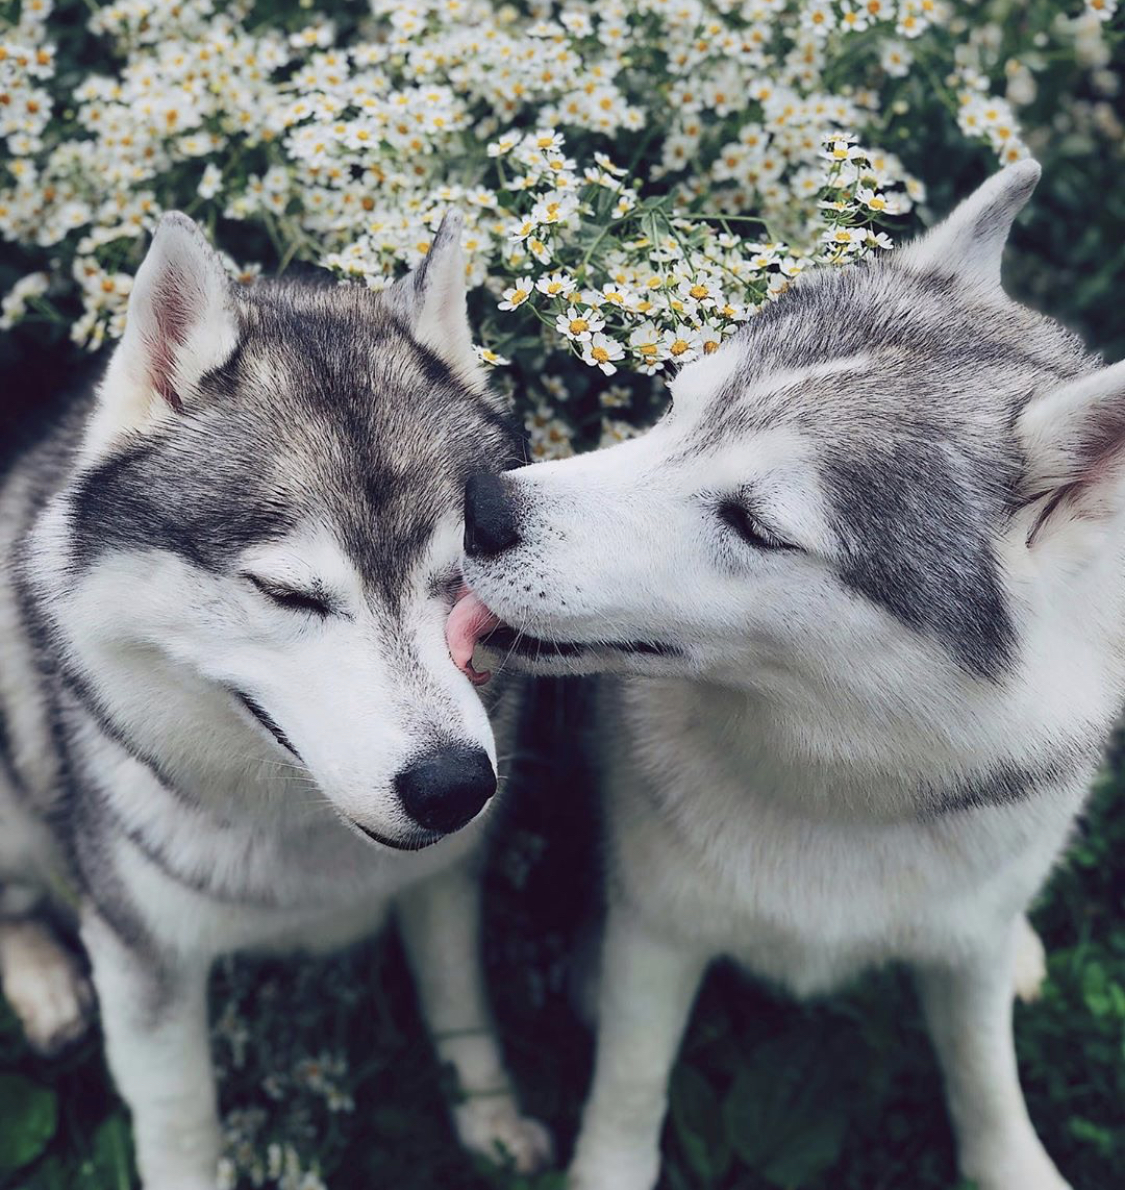 A Husky licking the face of another Husky sitting next to him while sitting in the field of chamomile flowers